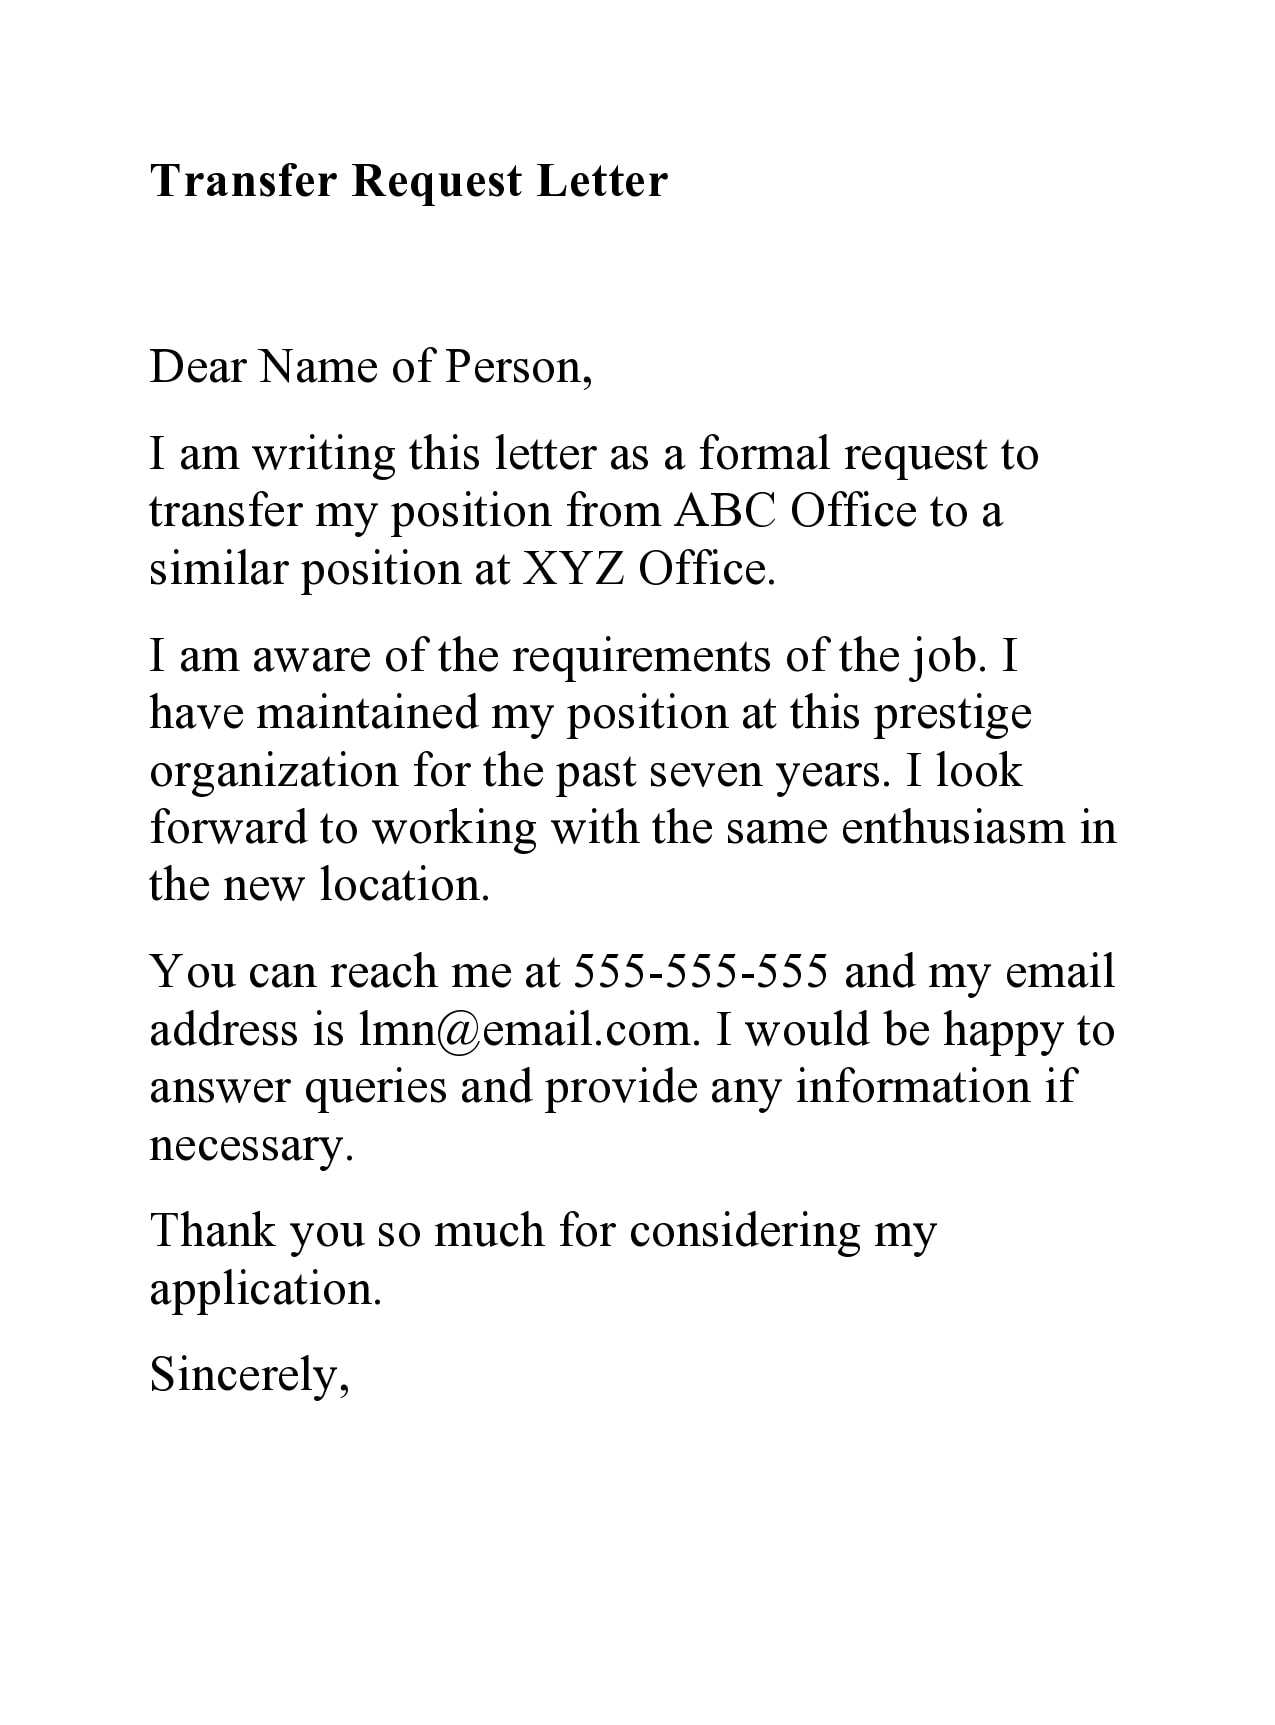 How To Write A Letter Asking For A Job Transfer